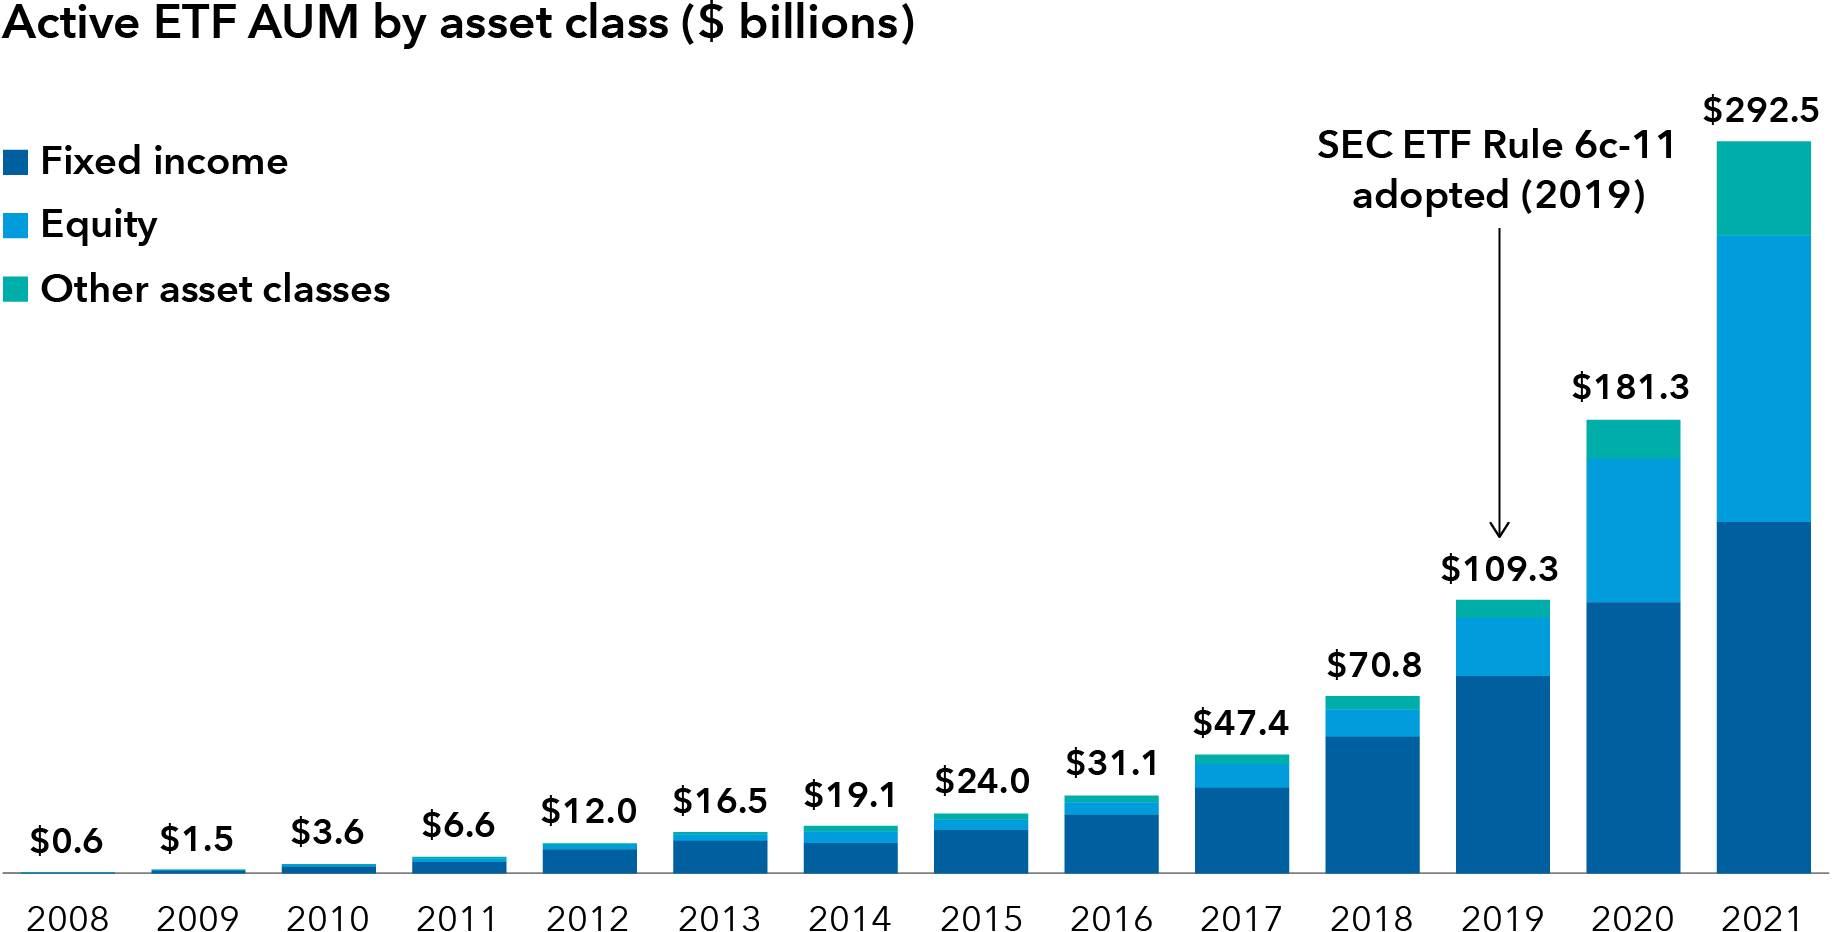 A bar chart showing assets under management (AUM) in active ETFs by year from 2008 to 2021. In 2008, active ETFs had a total AUM of $0.6 billion. It reached $1.5 billion in 2009; $3.6 billion in 2010; $6.6 billion in 2011; $12.0 billion in 2012; $16.5 billion in 2013; $19.1 billion in 2014; $24.0 billion in 2015; $31.1 billion in 2016; $47.4 billion in 2017; and $70.8 billion in 2018. In 2019, the year SEC ETF Rule 6c-11 was adopted, the active ETF total AUM reached $109.3 billion. It rose to $181.3 billion in 2020; and $292.5 billion in 2021. The share of AUM represented by equity and other asset classes increased more dramatically relative to fixed income over the last five years, and surpassed the fixed income AUM for the first time in 2021. 